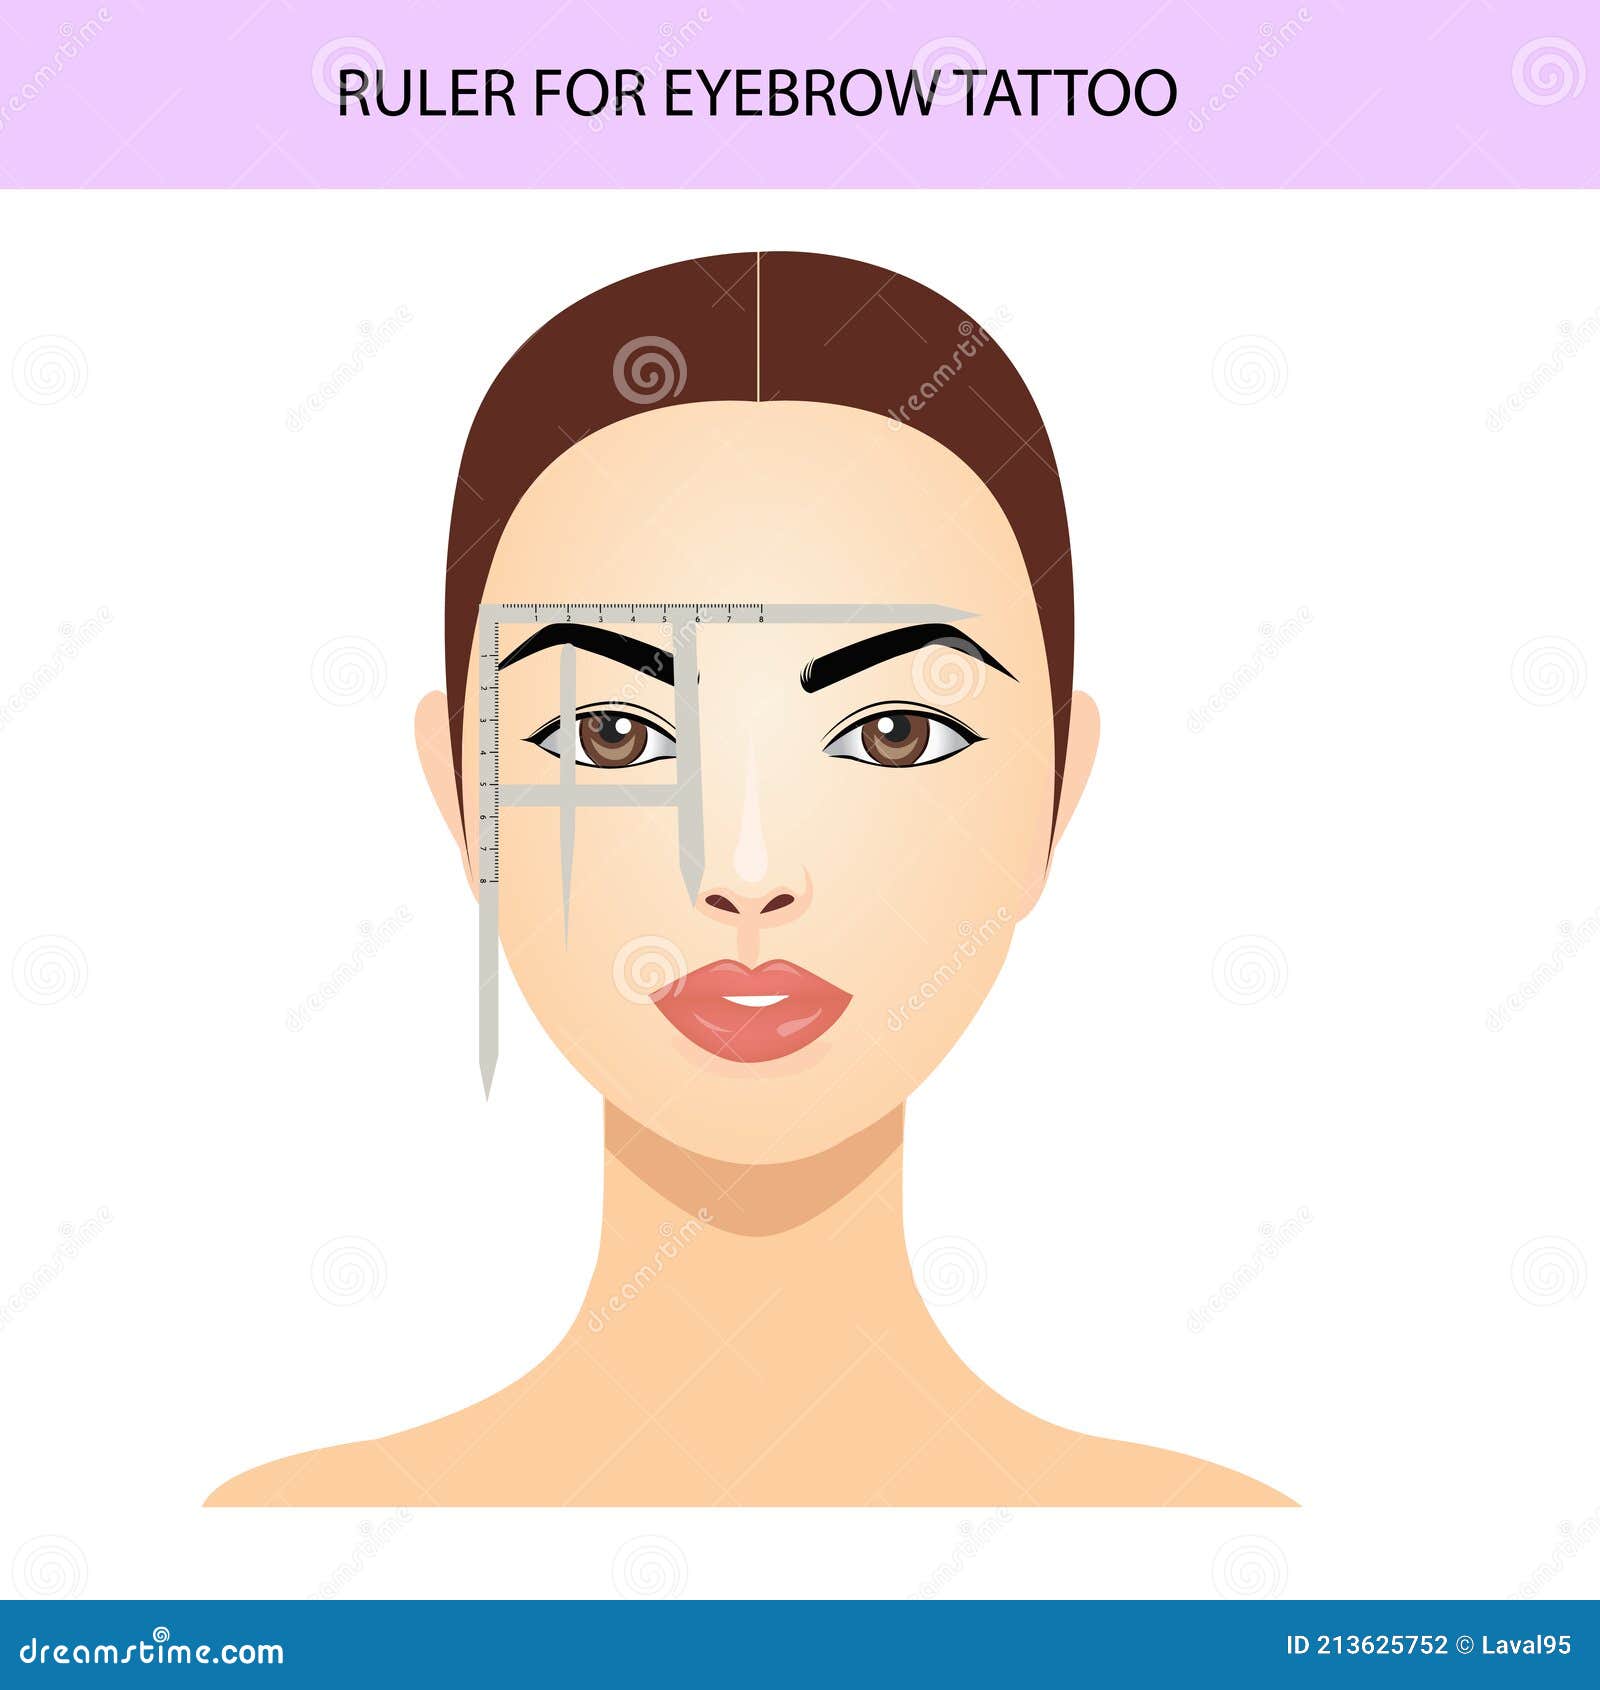 eyebrow tattoo ruler attached to face, eyebrow guide,  